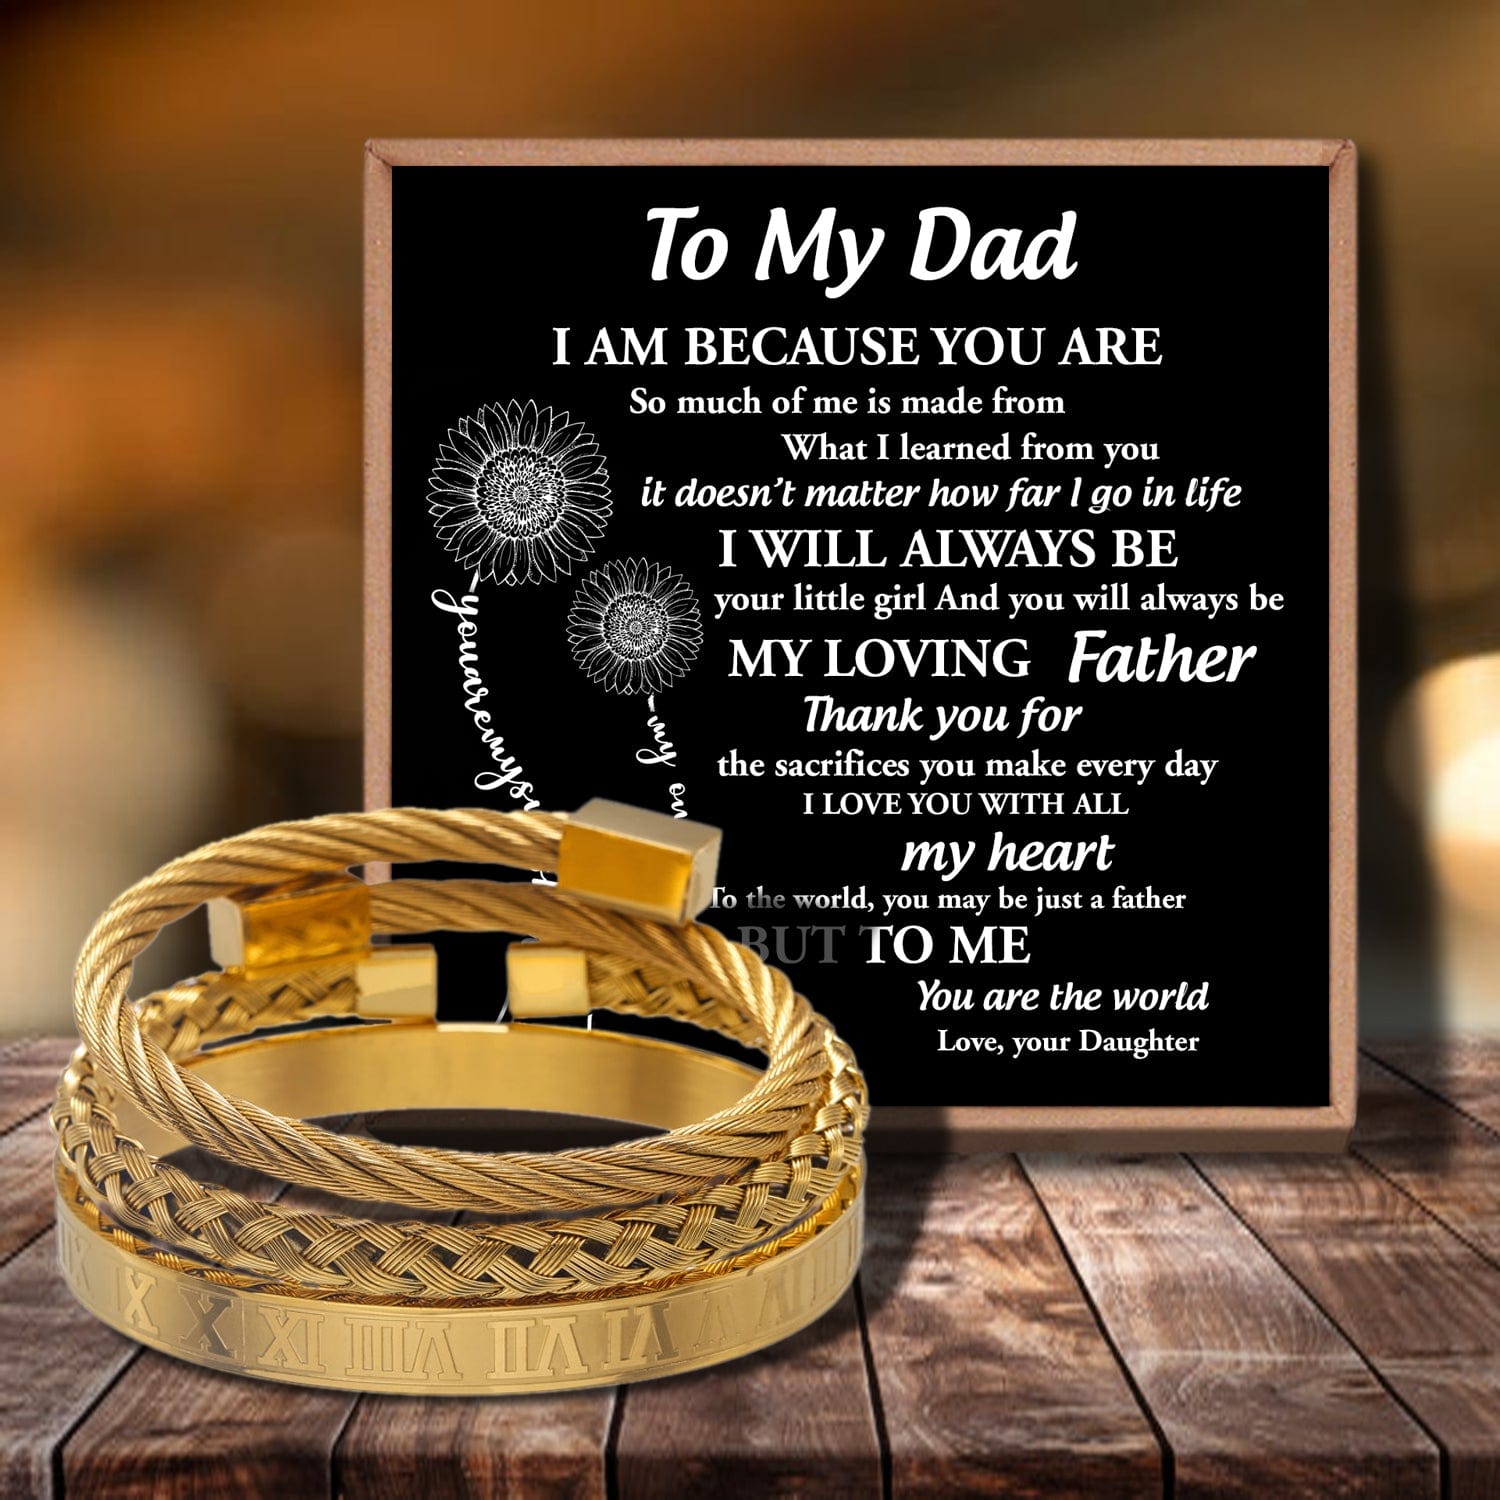 Bracelets For Dad Daughter To Dad - I Will Always Be Your Little Girl Bangle Weave Roman Numeral Bracelets GiveMe-Gifts